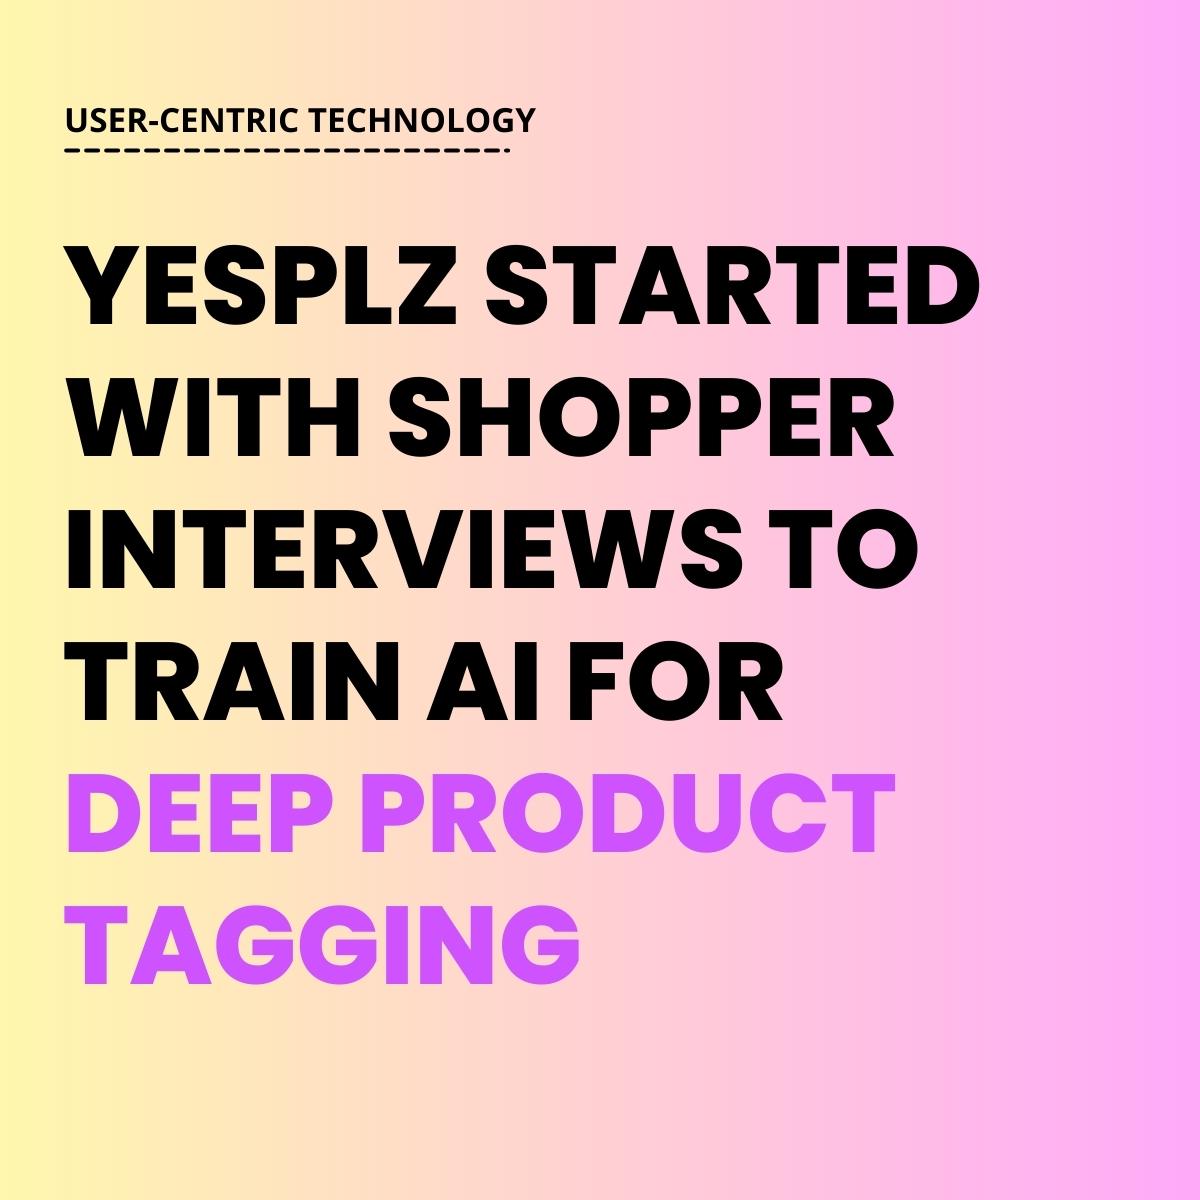 A gradient image with text about YesPlz shopper interviews